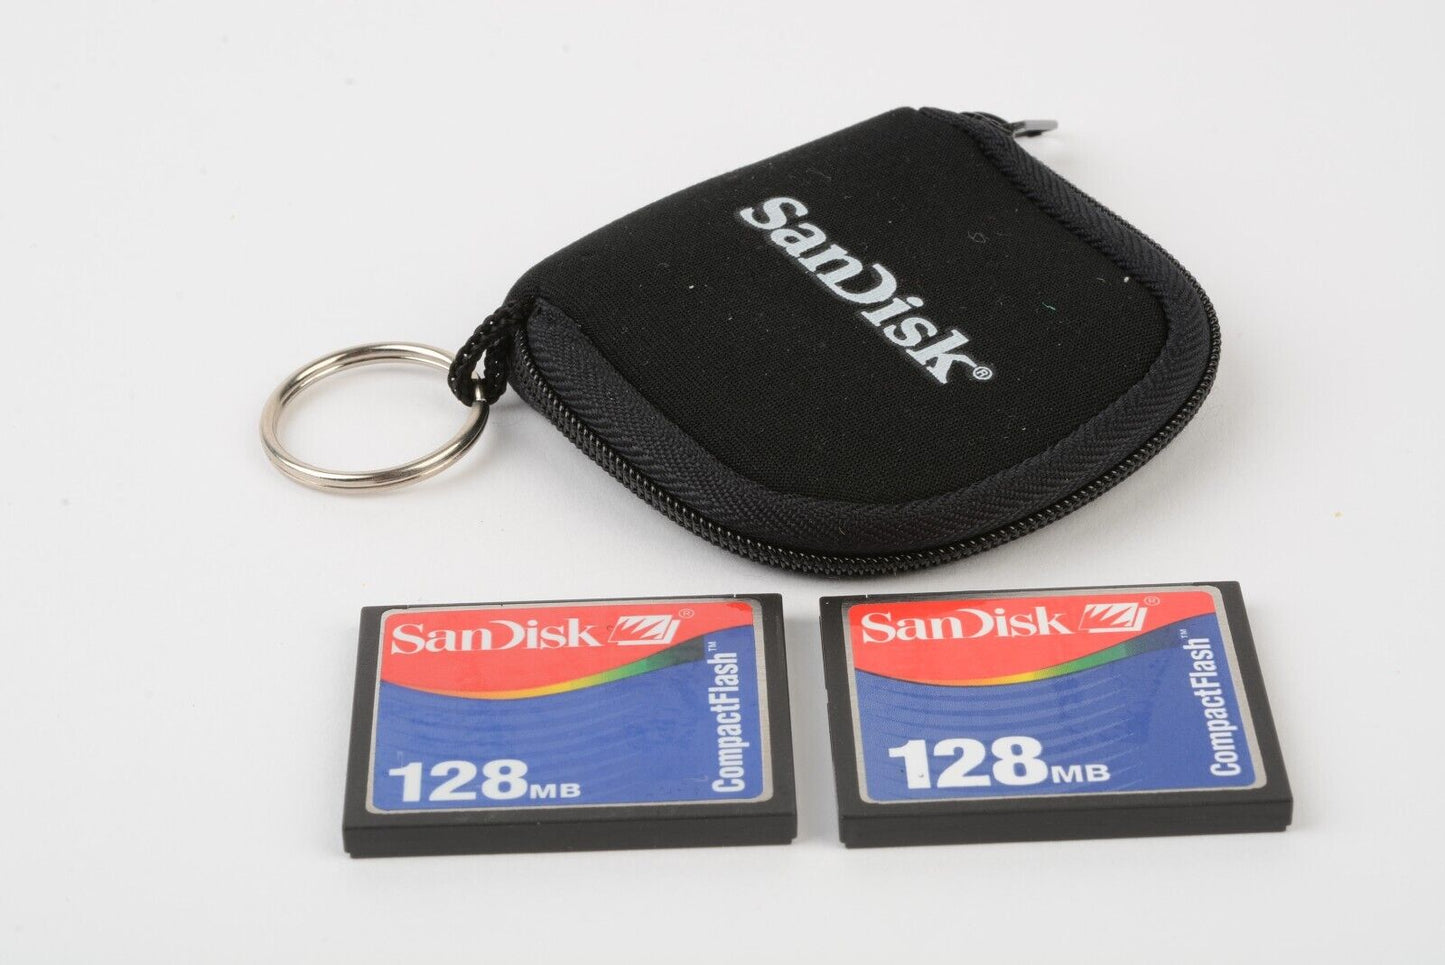 SET OF 2 EXC++ SANDISK 128MB COMPACTFLASH CF MEMORY CARD SDCFB-128 w/POUCH